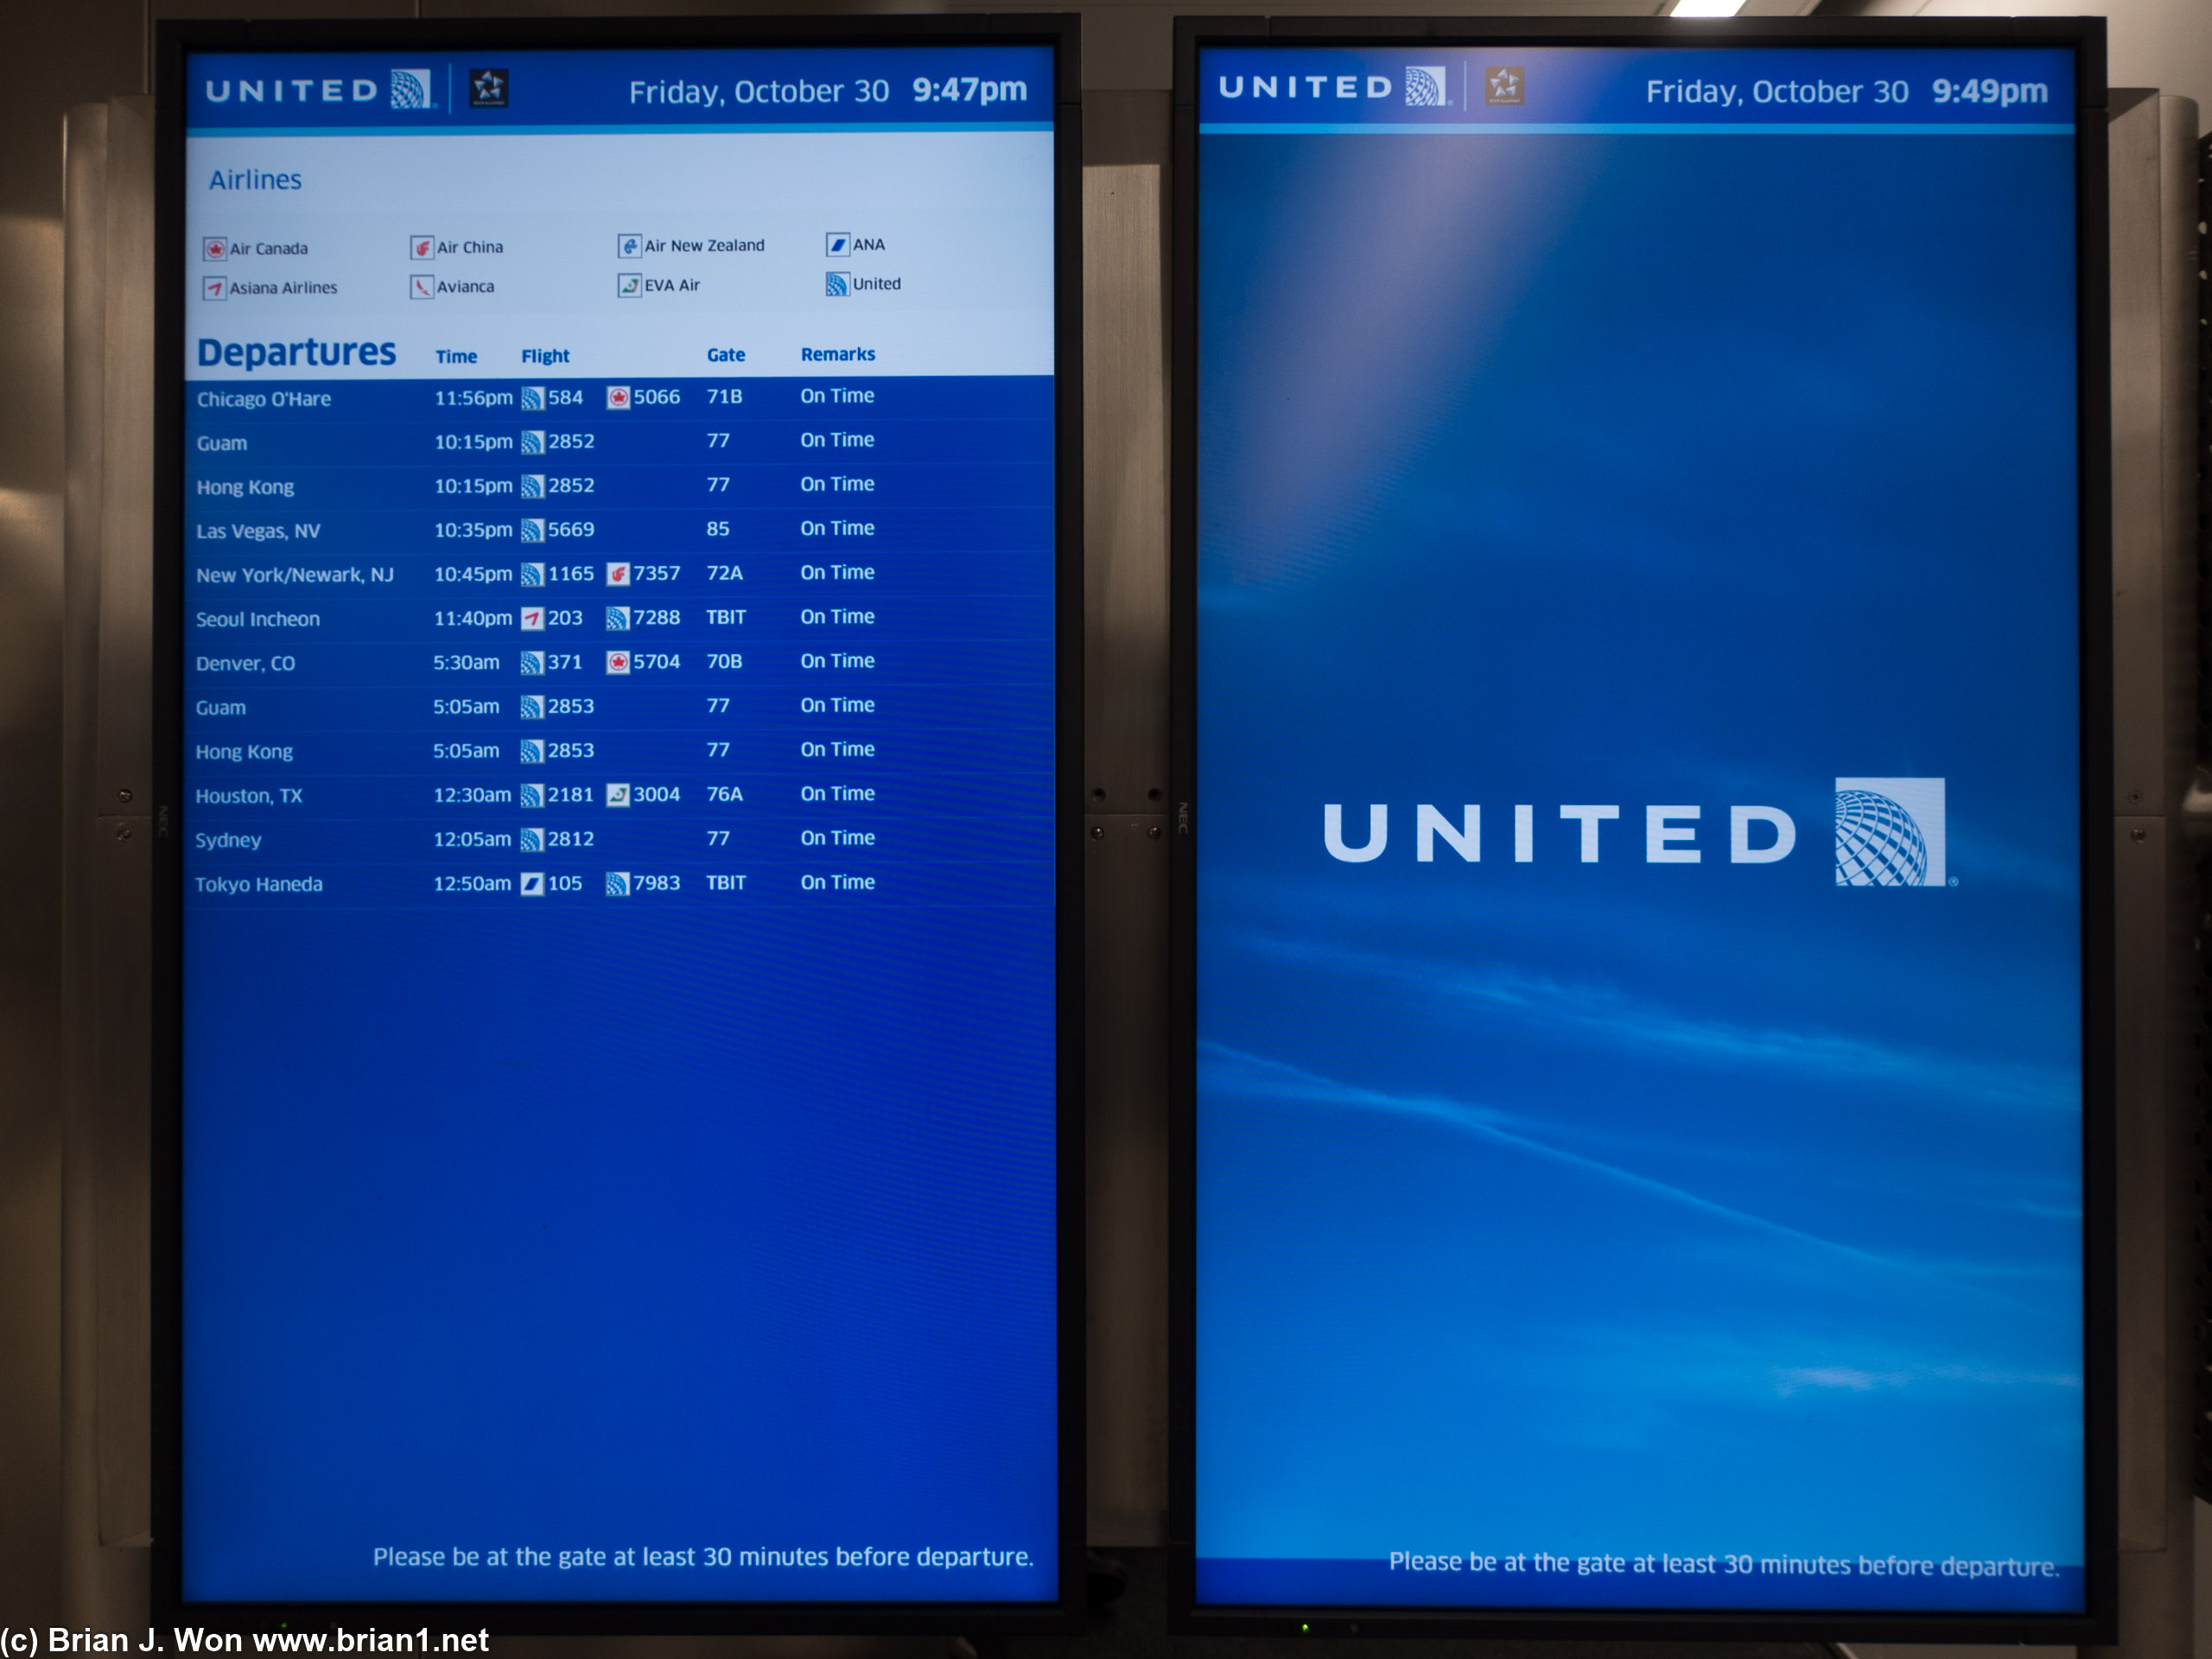 Late-night/early early morning departure board is so sad.